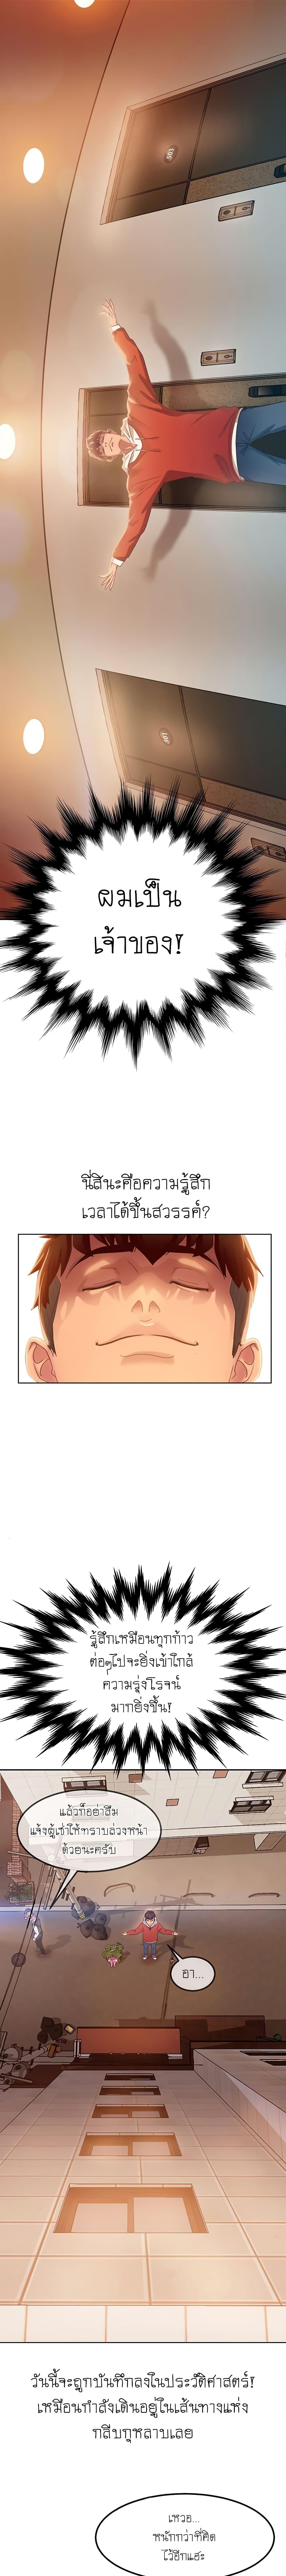 A Twisted Day 1 ภาพ 4